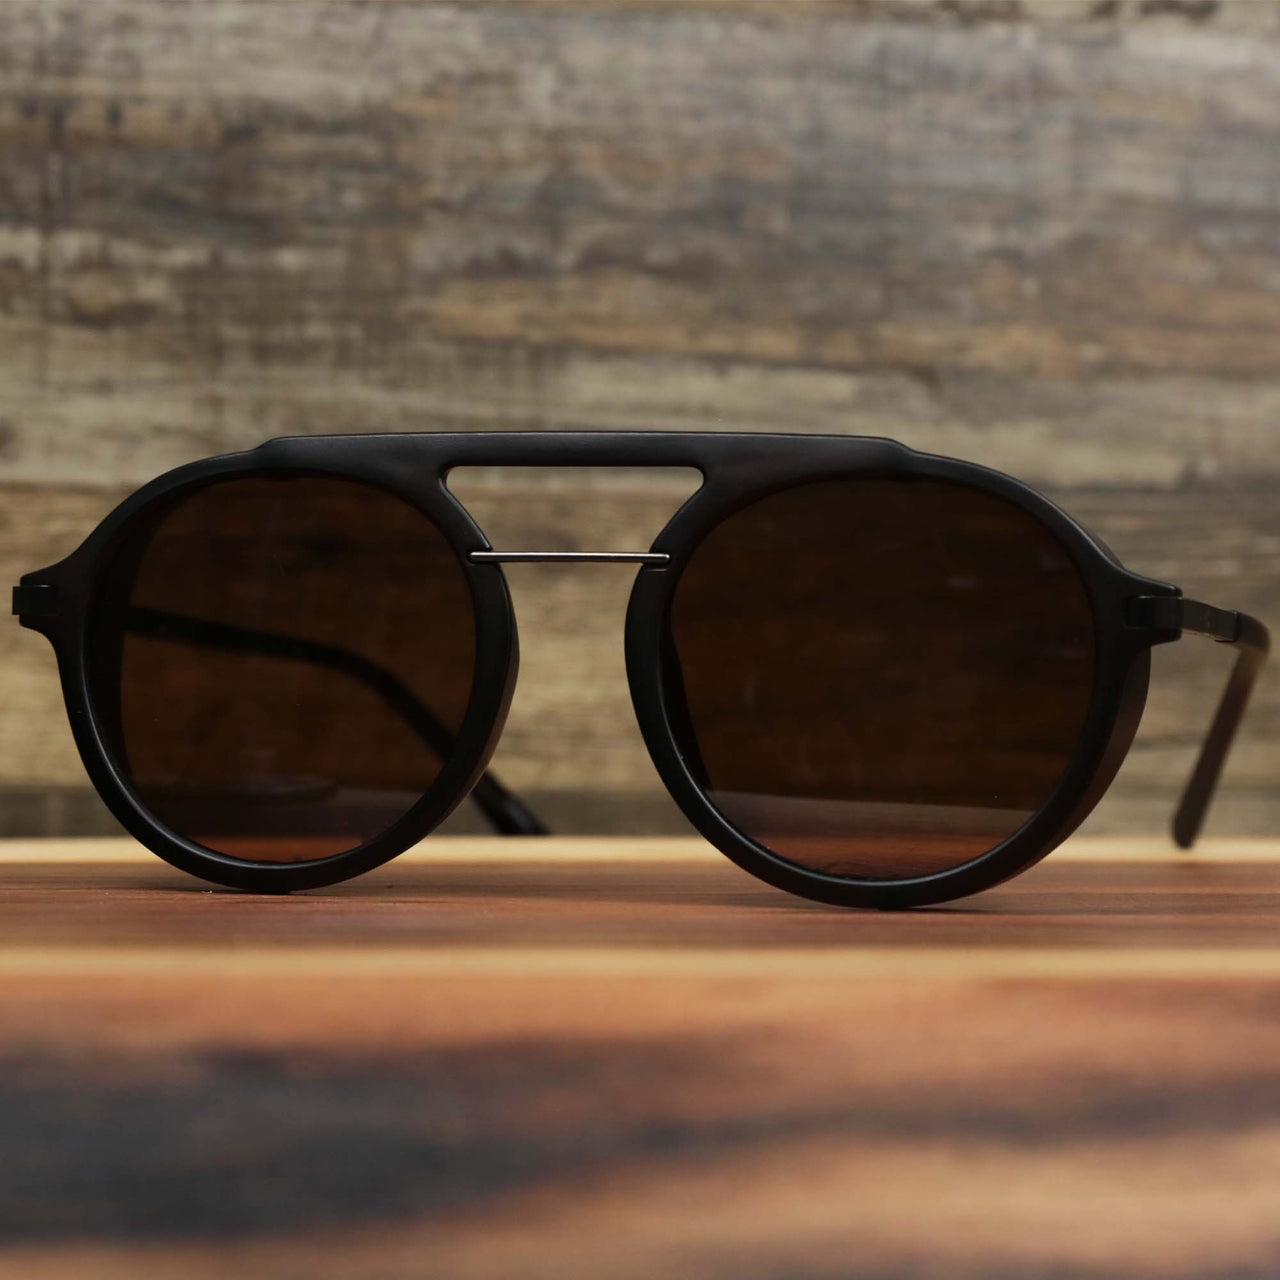 The Steampunk Frames Brown Lens Sunglasses with Brown Frame